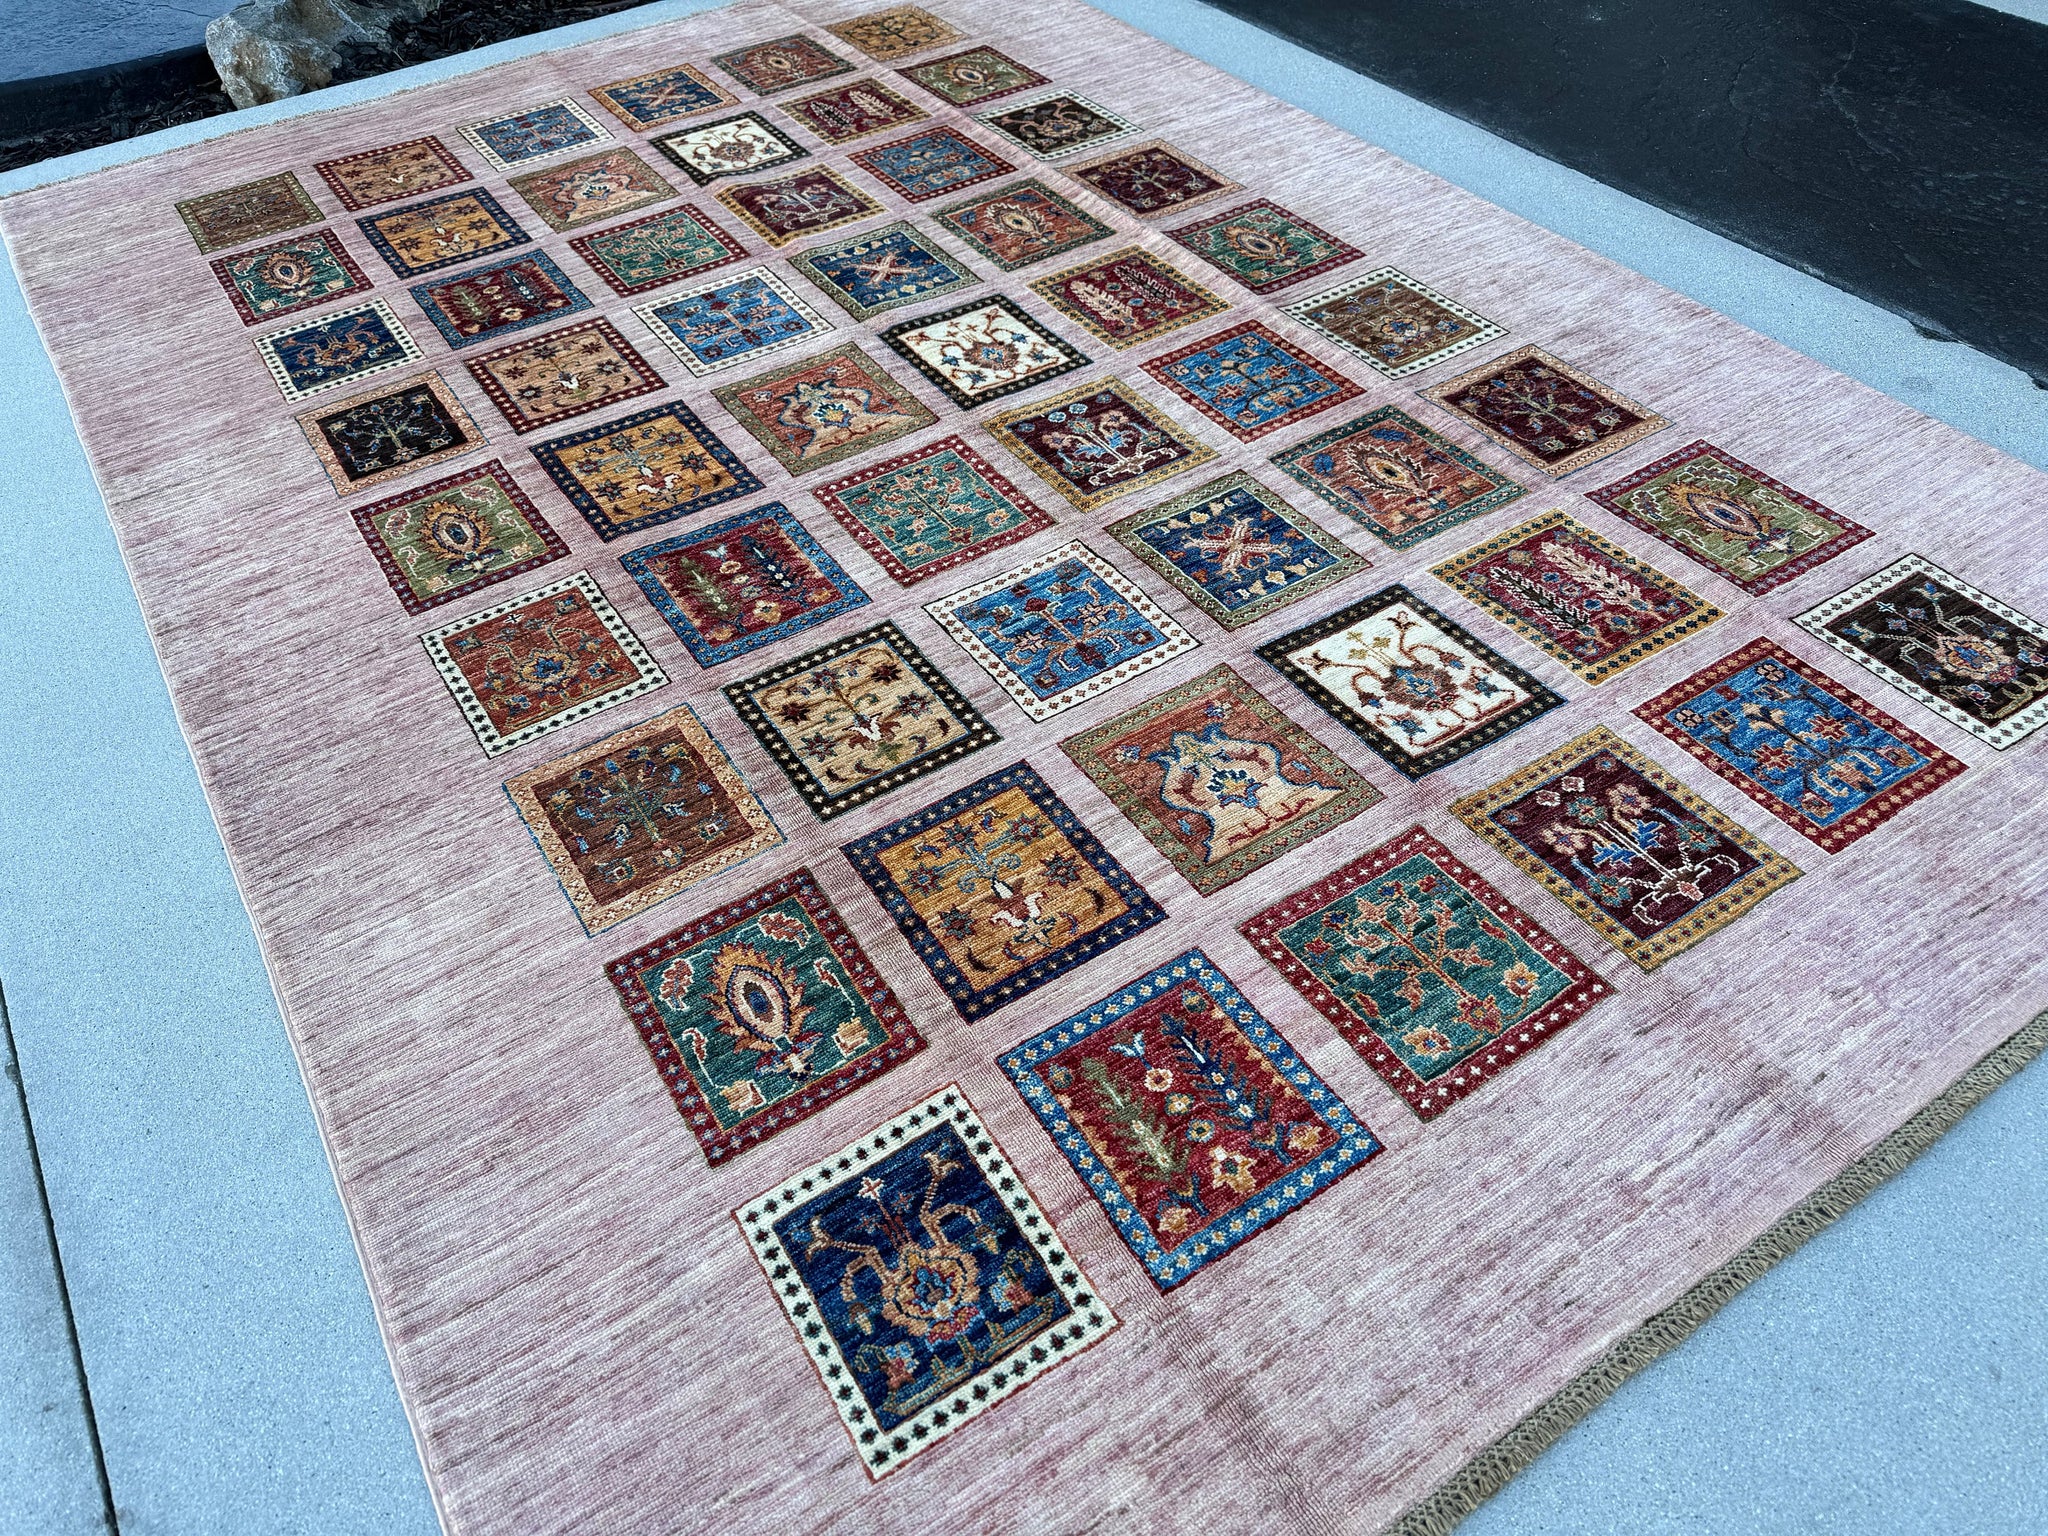 7x10 (210x305) Handmade Afghan Rug | Blush Pink Navy Blue Ivory Yellow Mustard Ivory Red Green | Wool Hand Knotted Nature Floral Mural